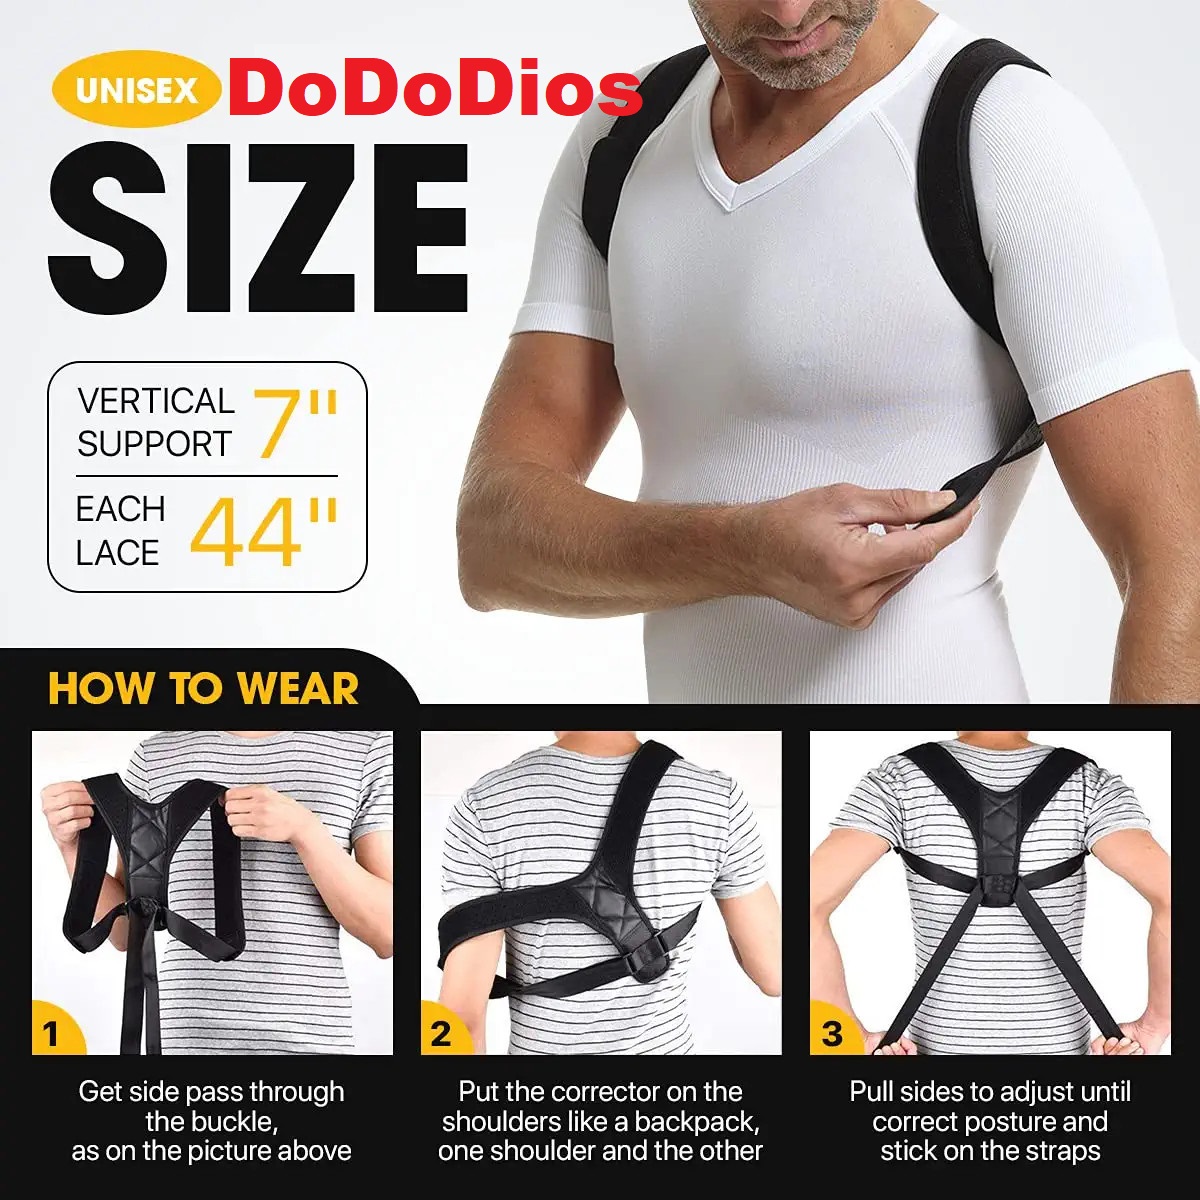 Back Brace Posture Corrector for Women and Men - Adjustable Upper Back Brace Straightener for Posture and Clavicle Support - Upper Spine Support, Providing Pain Relief From Neck, Upper Back Corrector and Shoulder (25-50&quot;) - dododios đai chống gù lưng